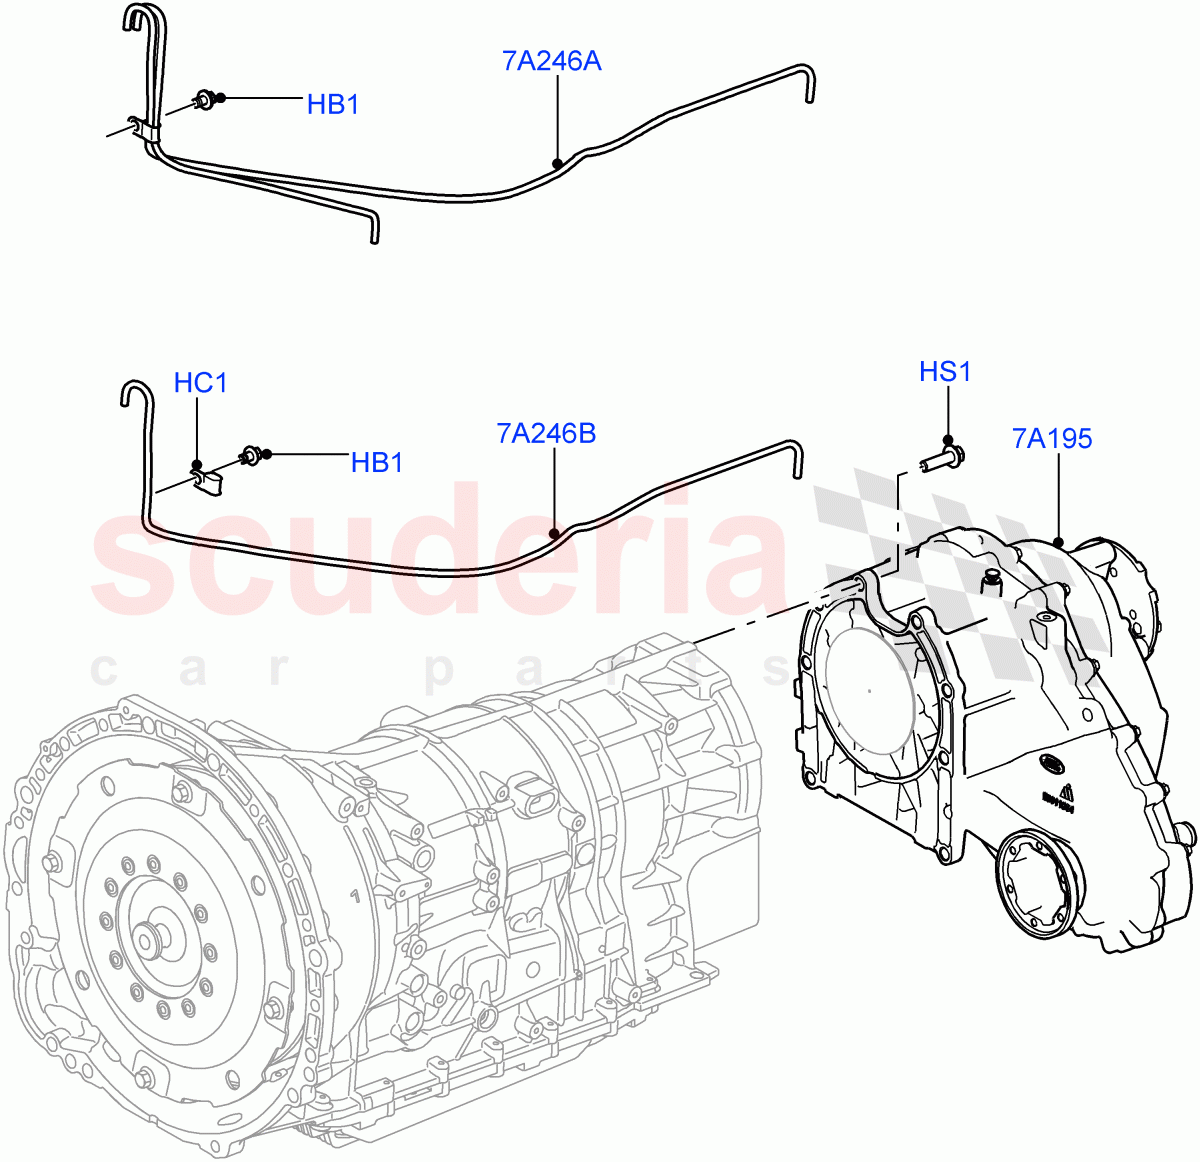 Transfer Drive Case(8 Speed Auto Trans ZF 8HP45,With 1 Speed Transfer Case,8 Speed Auto Trans ZF 8HP70 4WD)((V)FROMEA000001,(V)TOGA999999) of Land Rover Land Rover Range Rover Sport (2014+) [3.0 I6 Turbo Diesel AJ20D6]